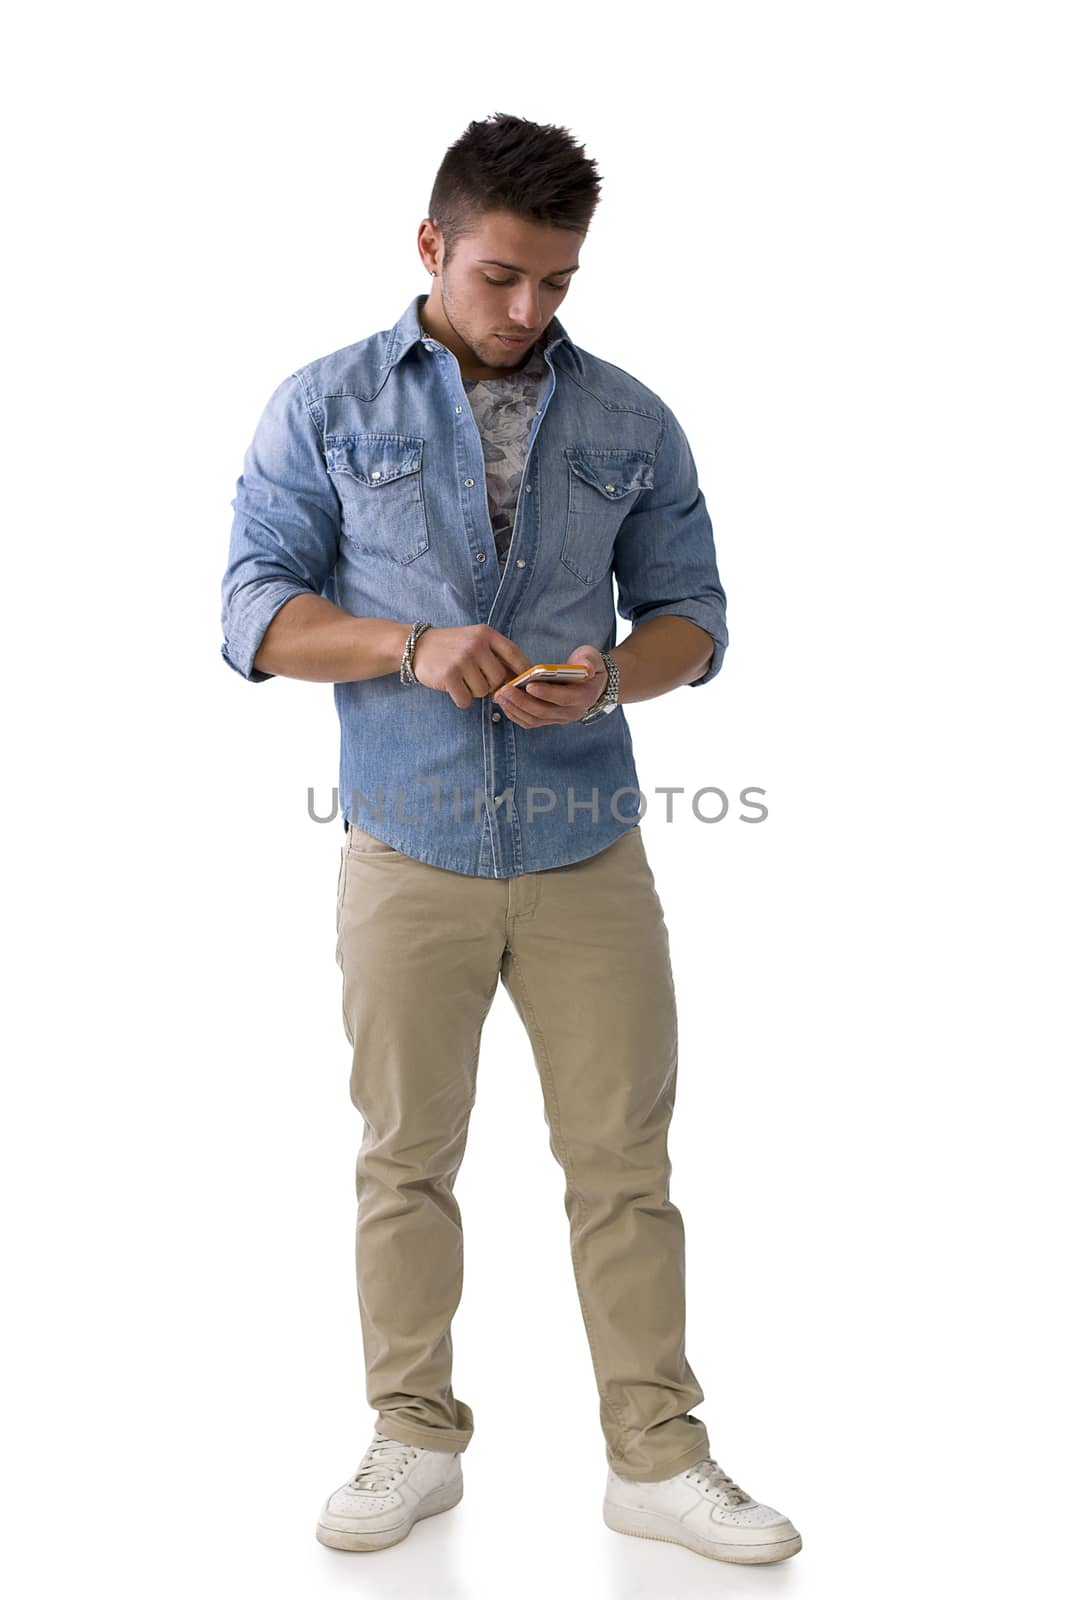 Handsome young man checking watch on his wrist, isolated on white. Full length shot